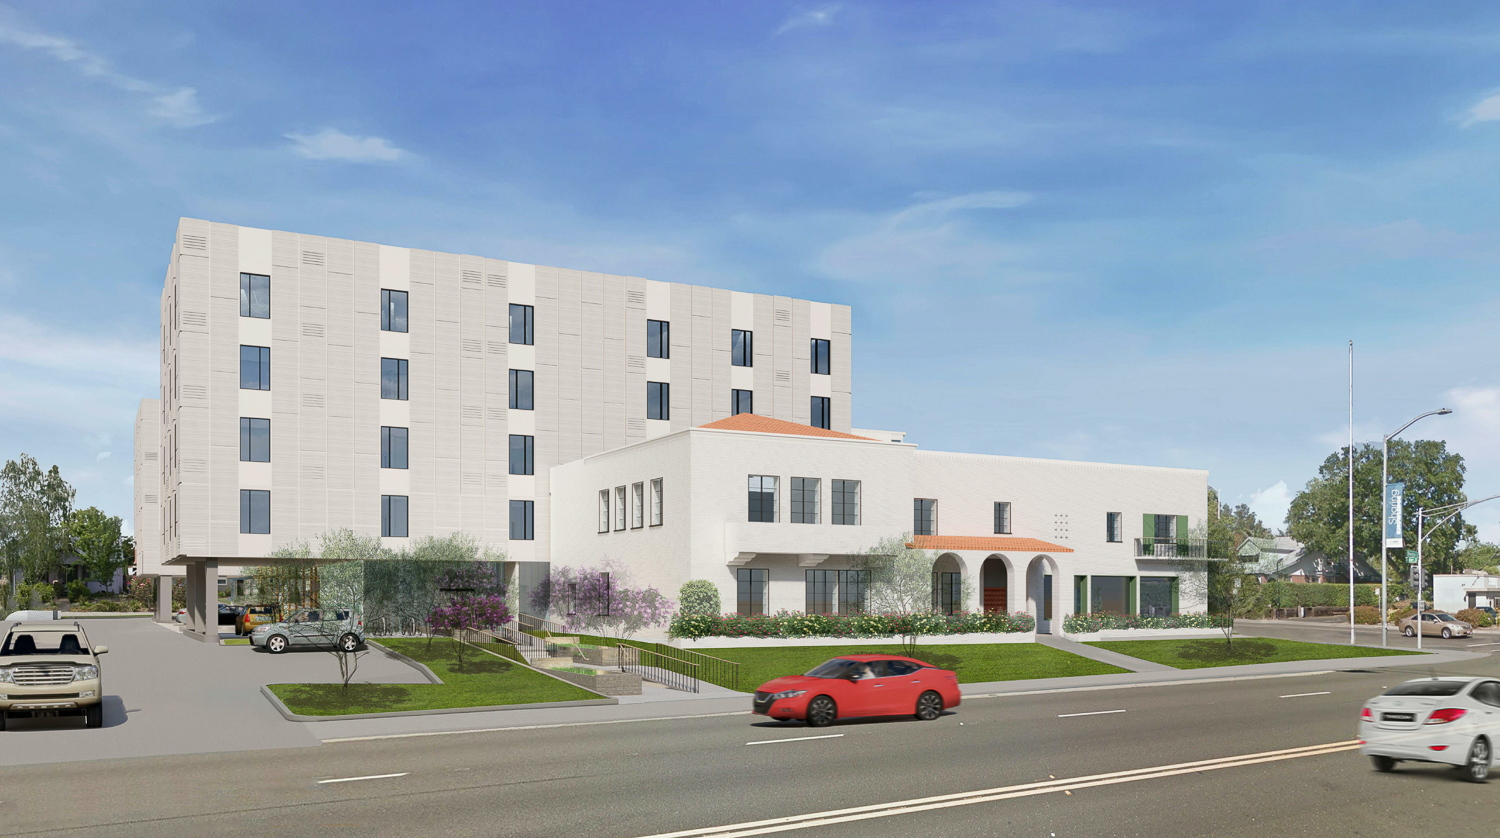 2200 Stockton Boulevard and the old factory, rendering by Stanton Architecture